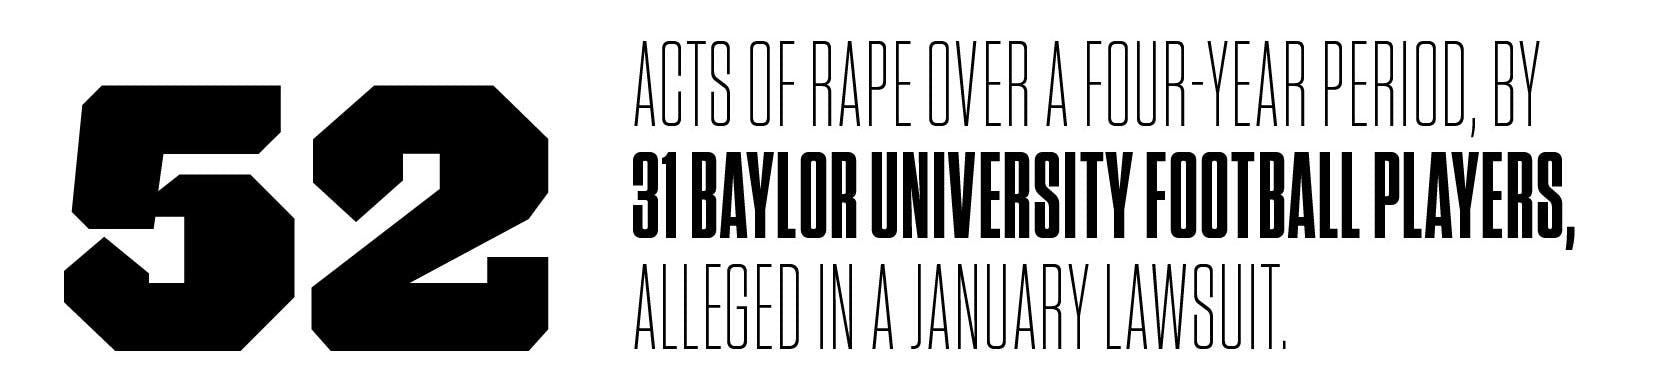 52: Acts of rape over a four-year period, by 31 Baylor University football players, alleged in a January lawsuit.